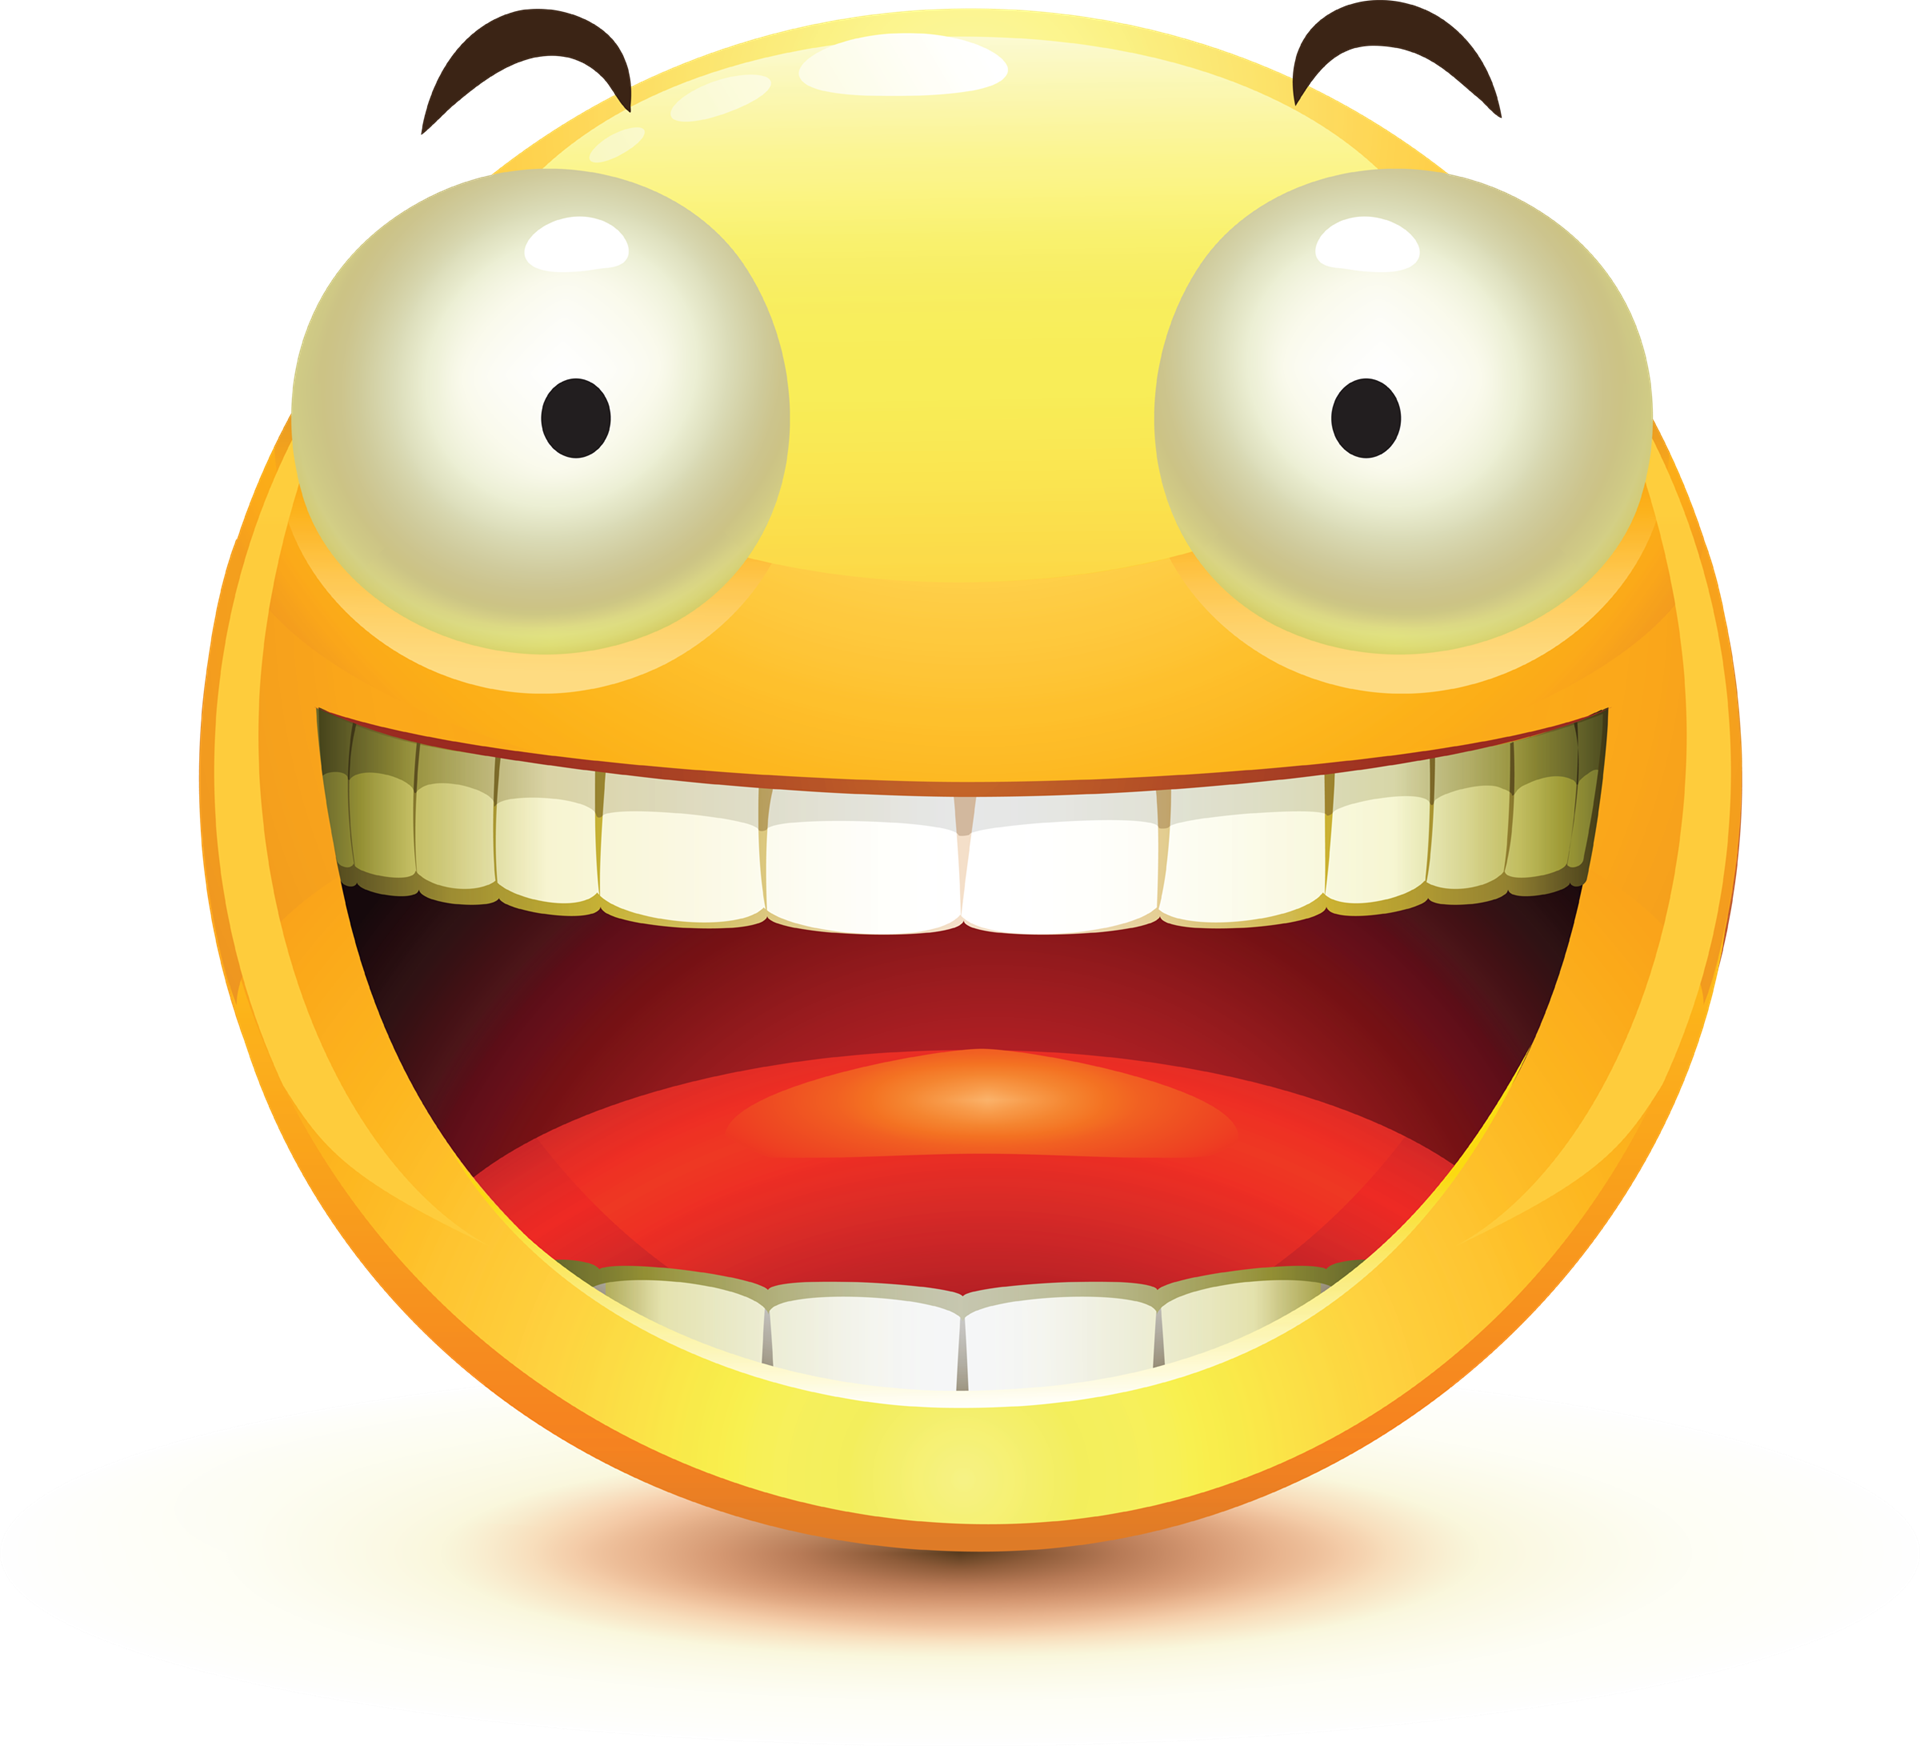 Download A Yellow Smiley Face With Big Teeth [100% Free] - FastPNG